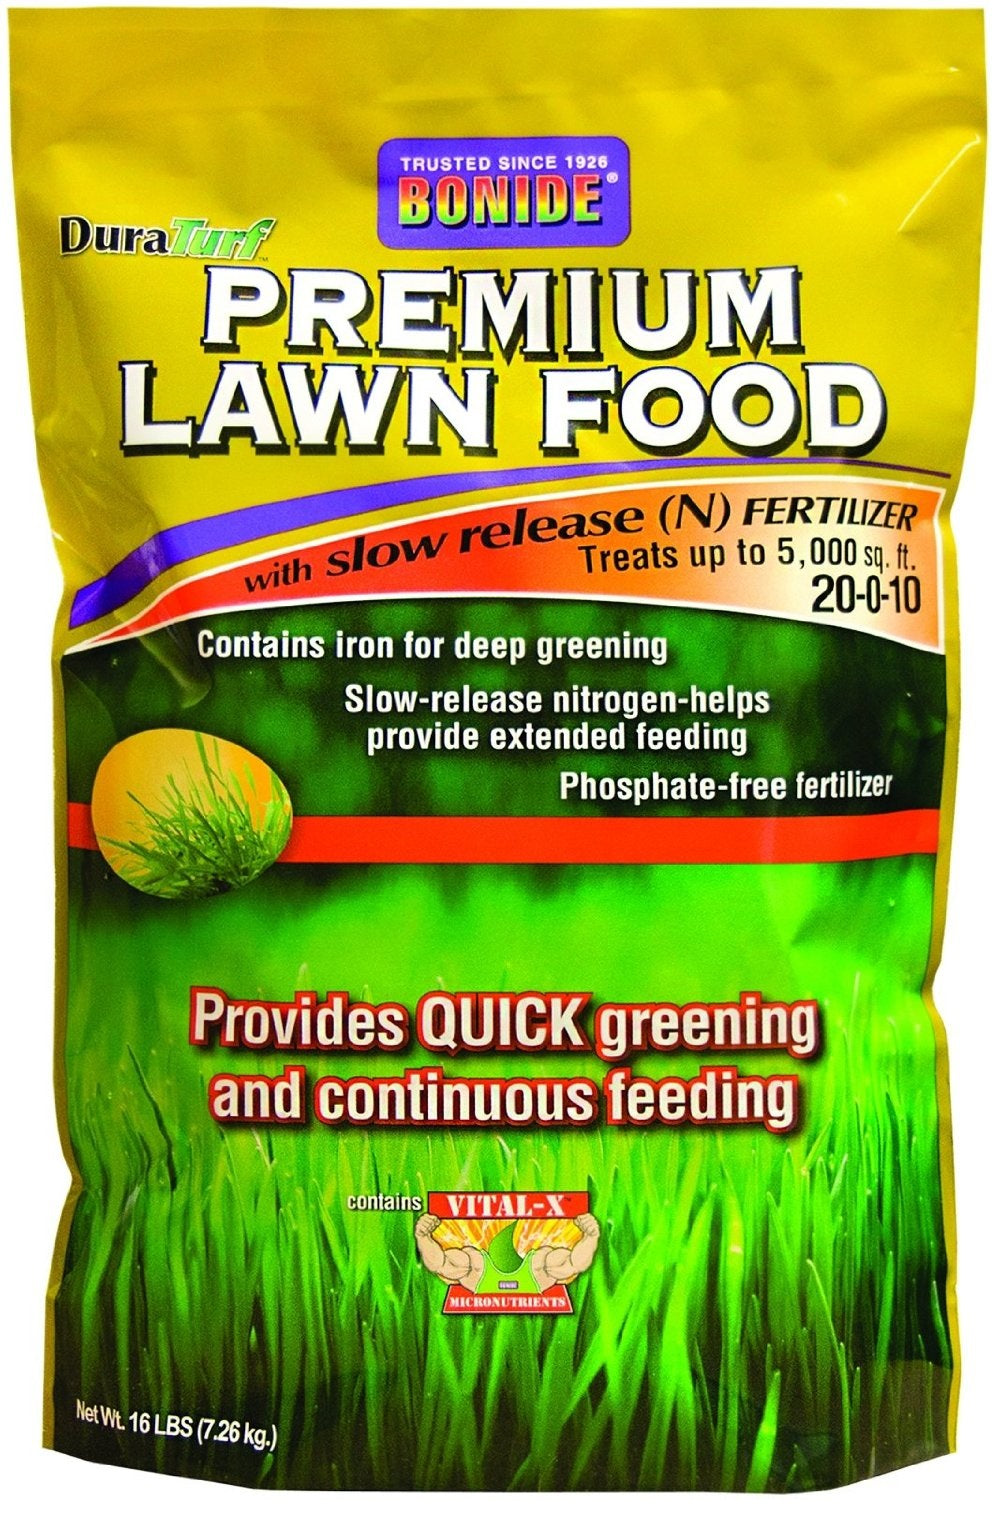 buy specialty lawn fertilizer at cheap rate in bulk. wholesale & retail lawn care supplies store.